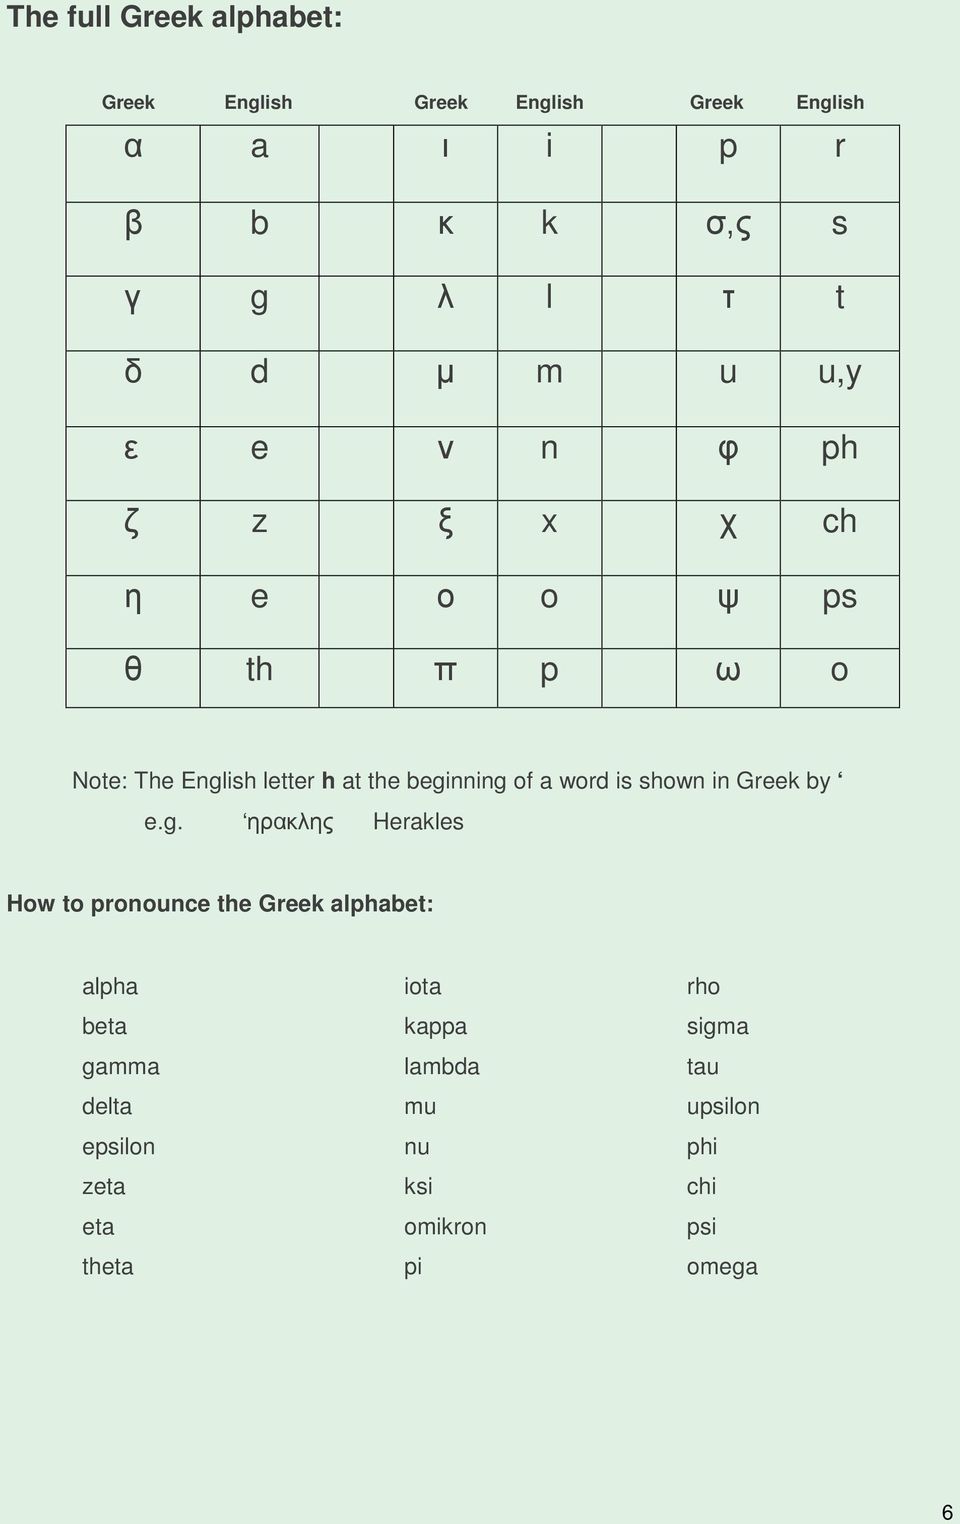 of a word is shown in Greek by e.g.